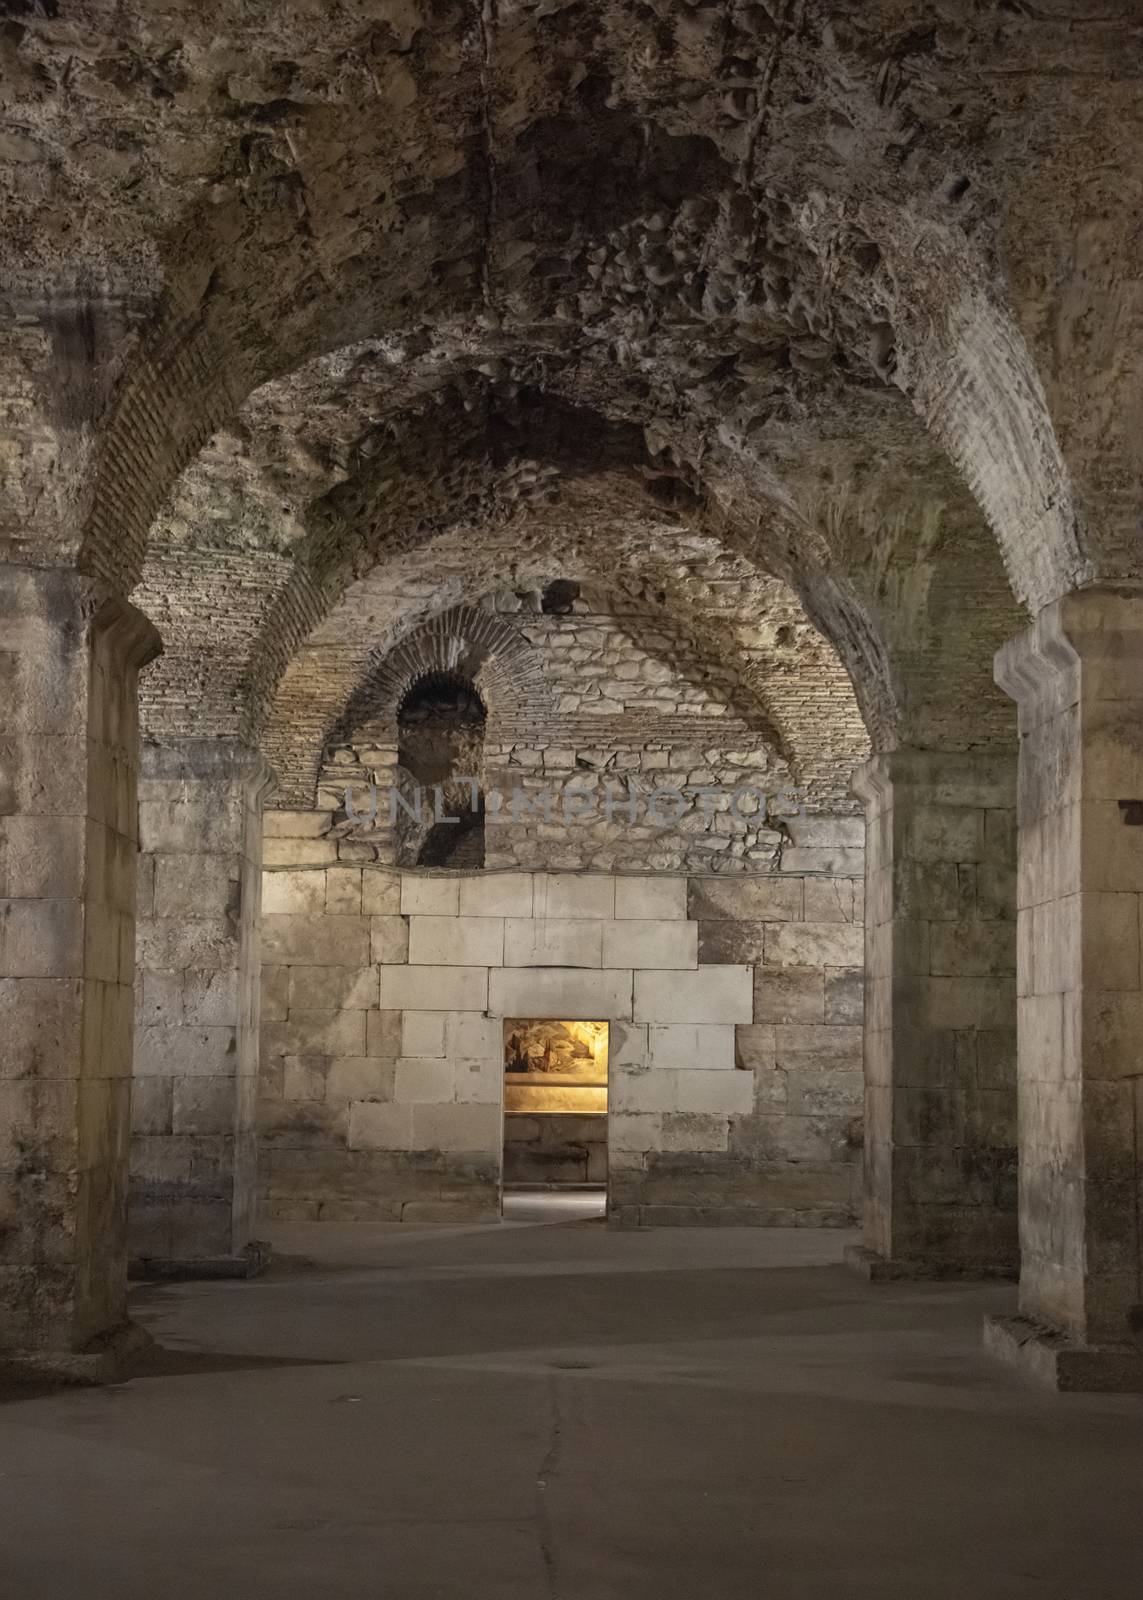 Croatia, Split - June 2018: Roman Emperor Diocletian Palace Catacombs In Split. Used as a filming location for Game of Thrones TV series